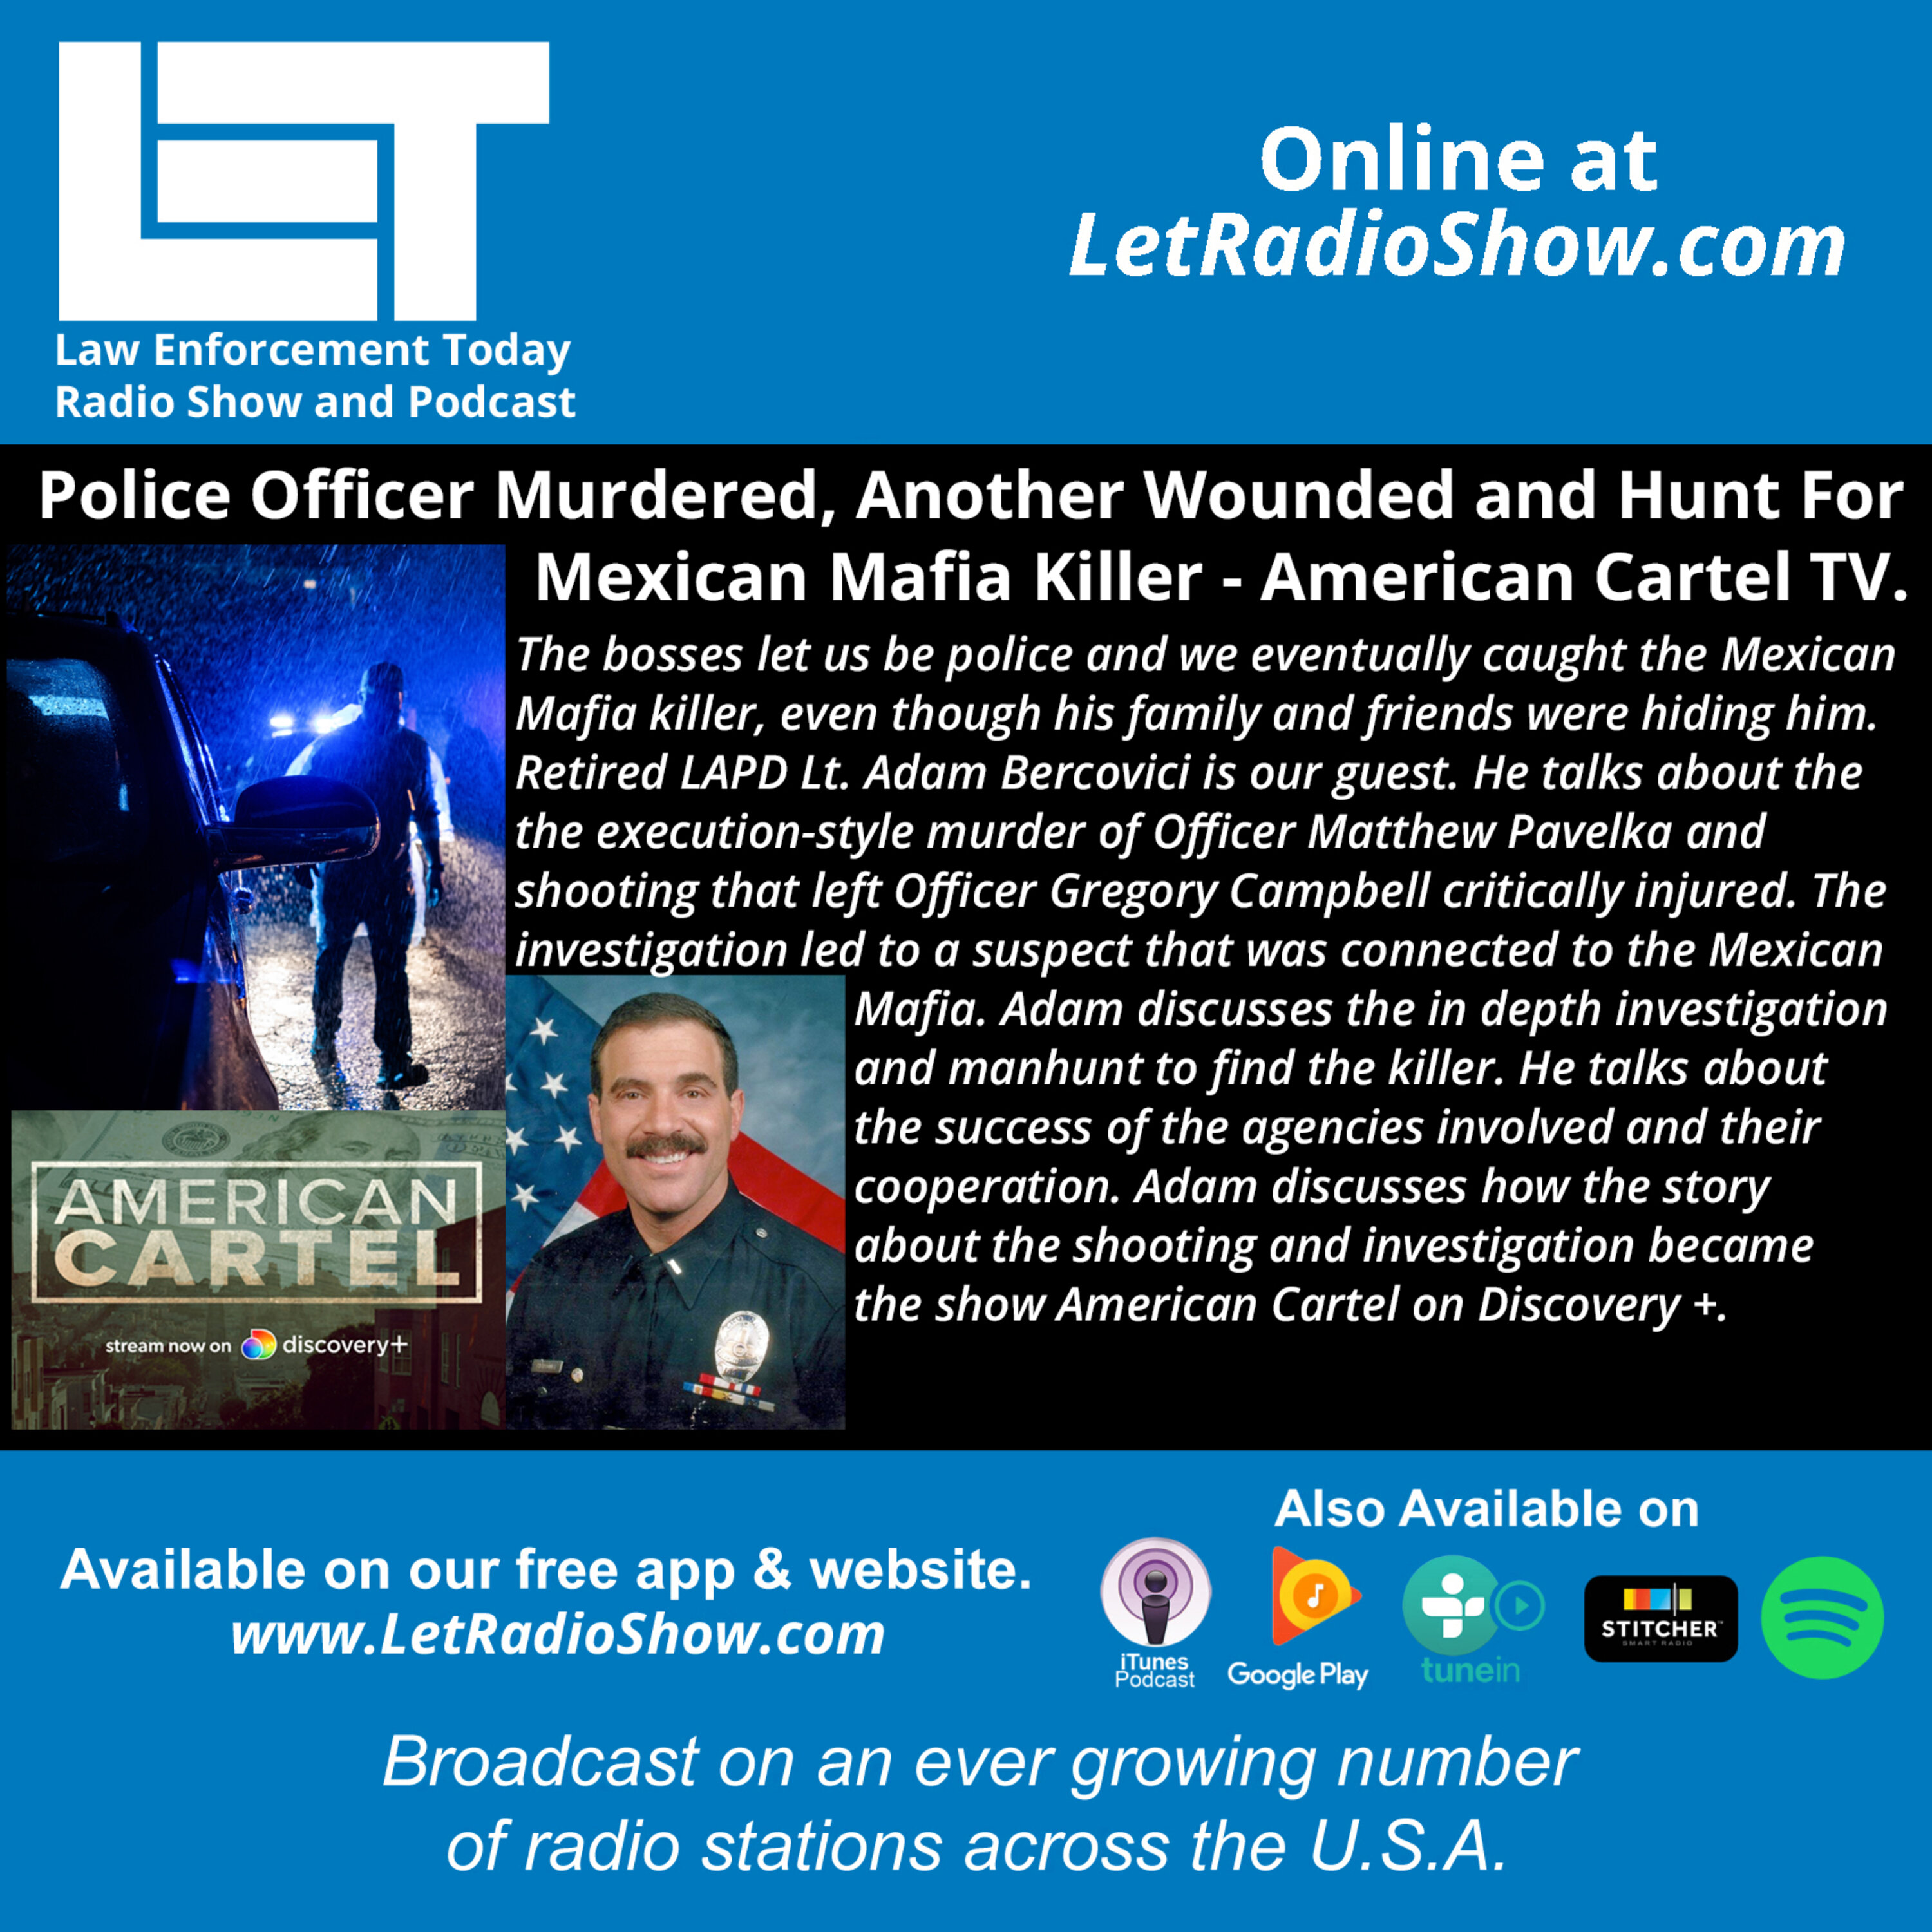 S5E32: Police Officer Murdered, Another Wounded and Hunt For Mexican Mafia Killer - American Cartel TV.